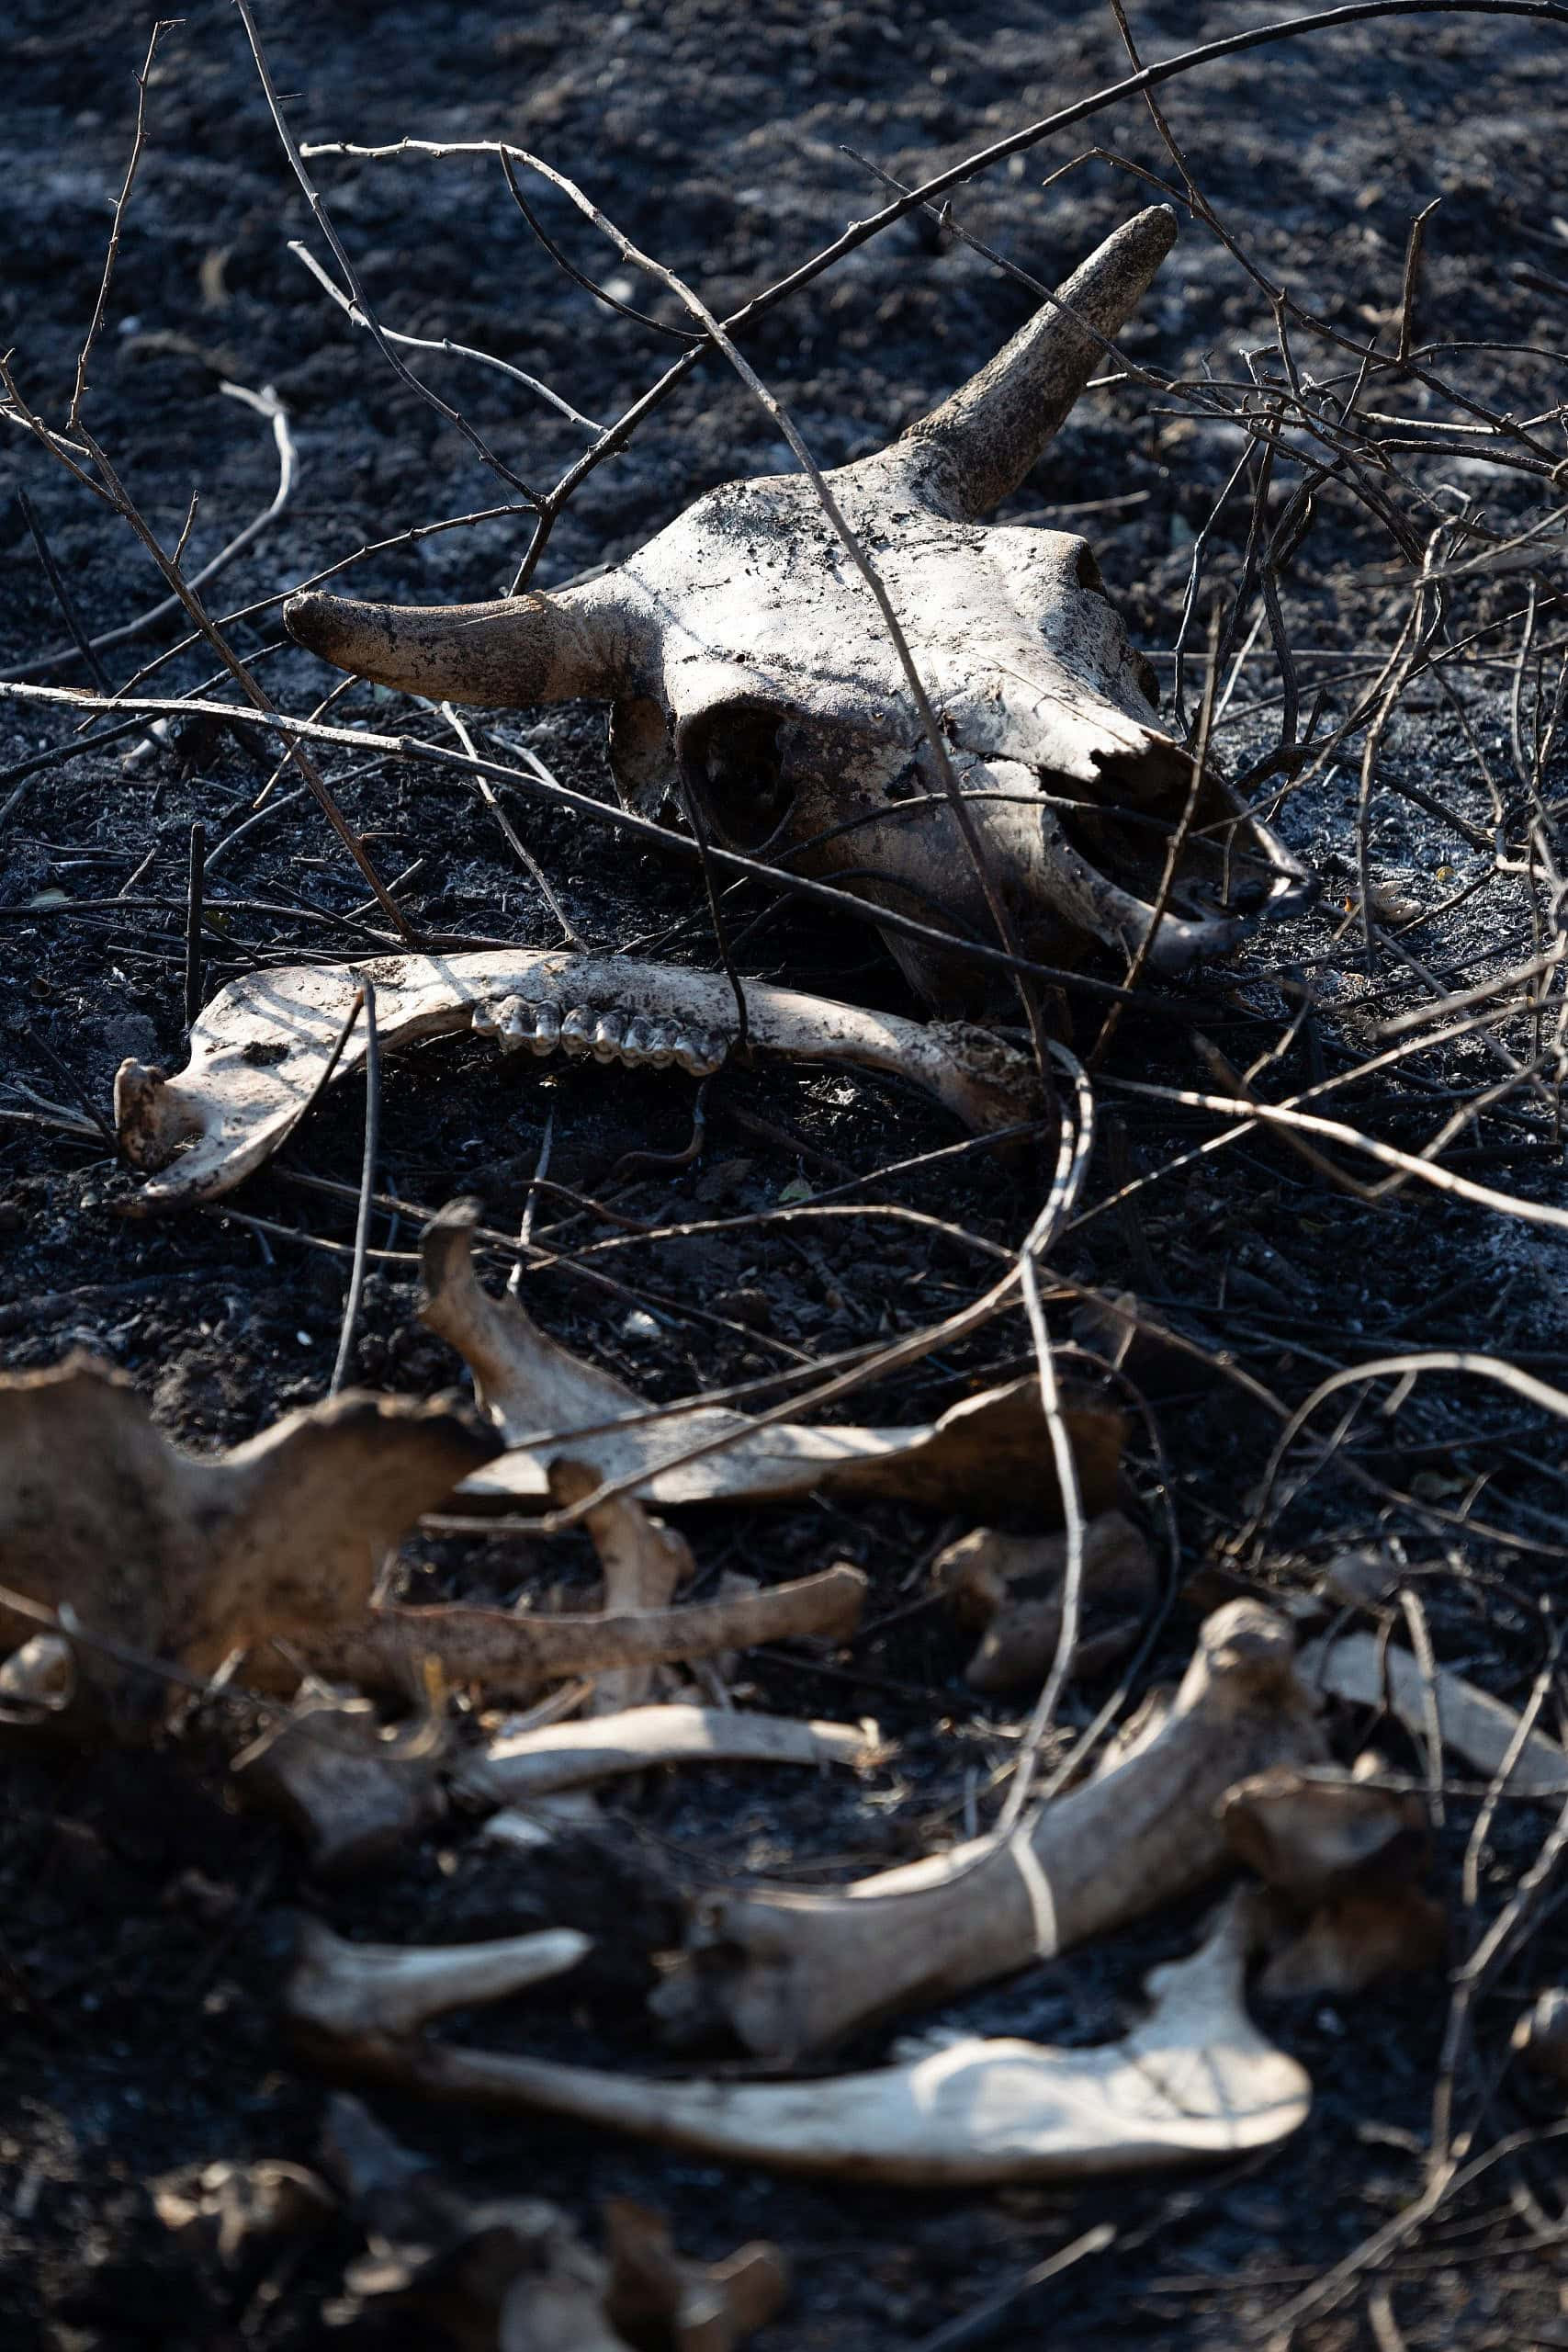 Dead Animals in Northern Israel Fires